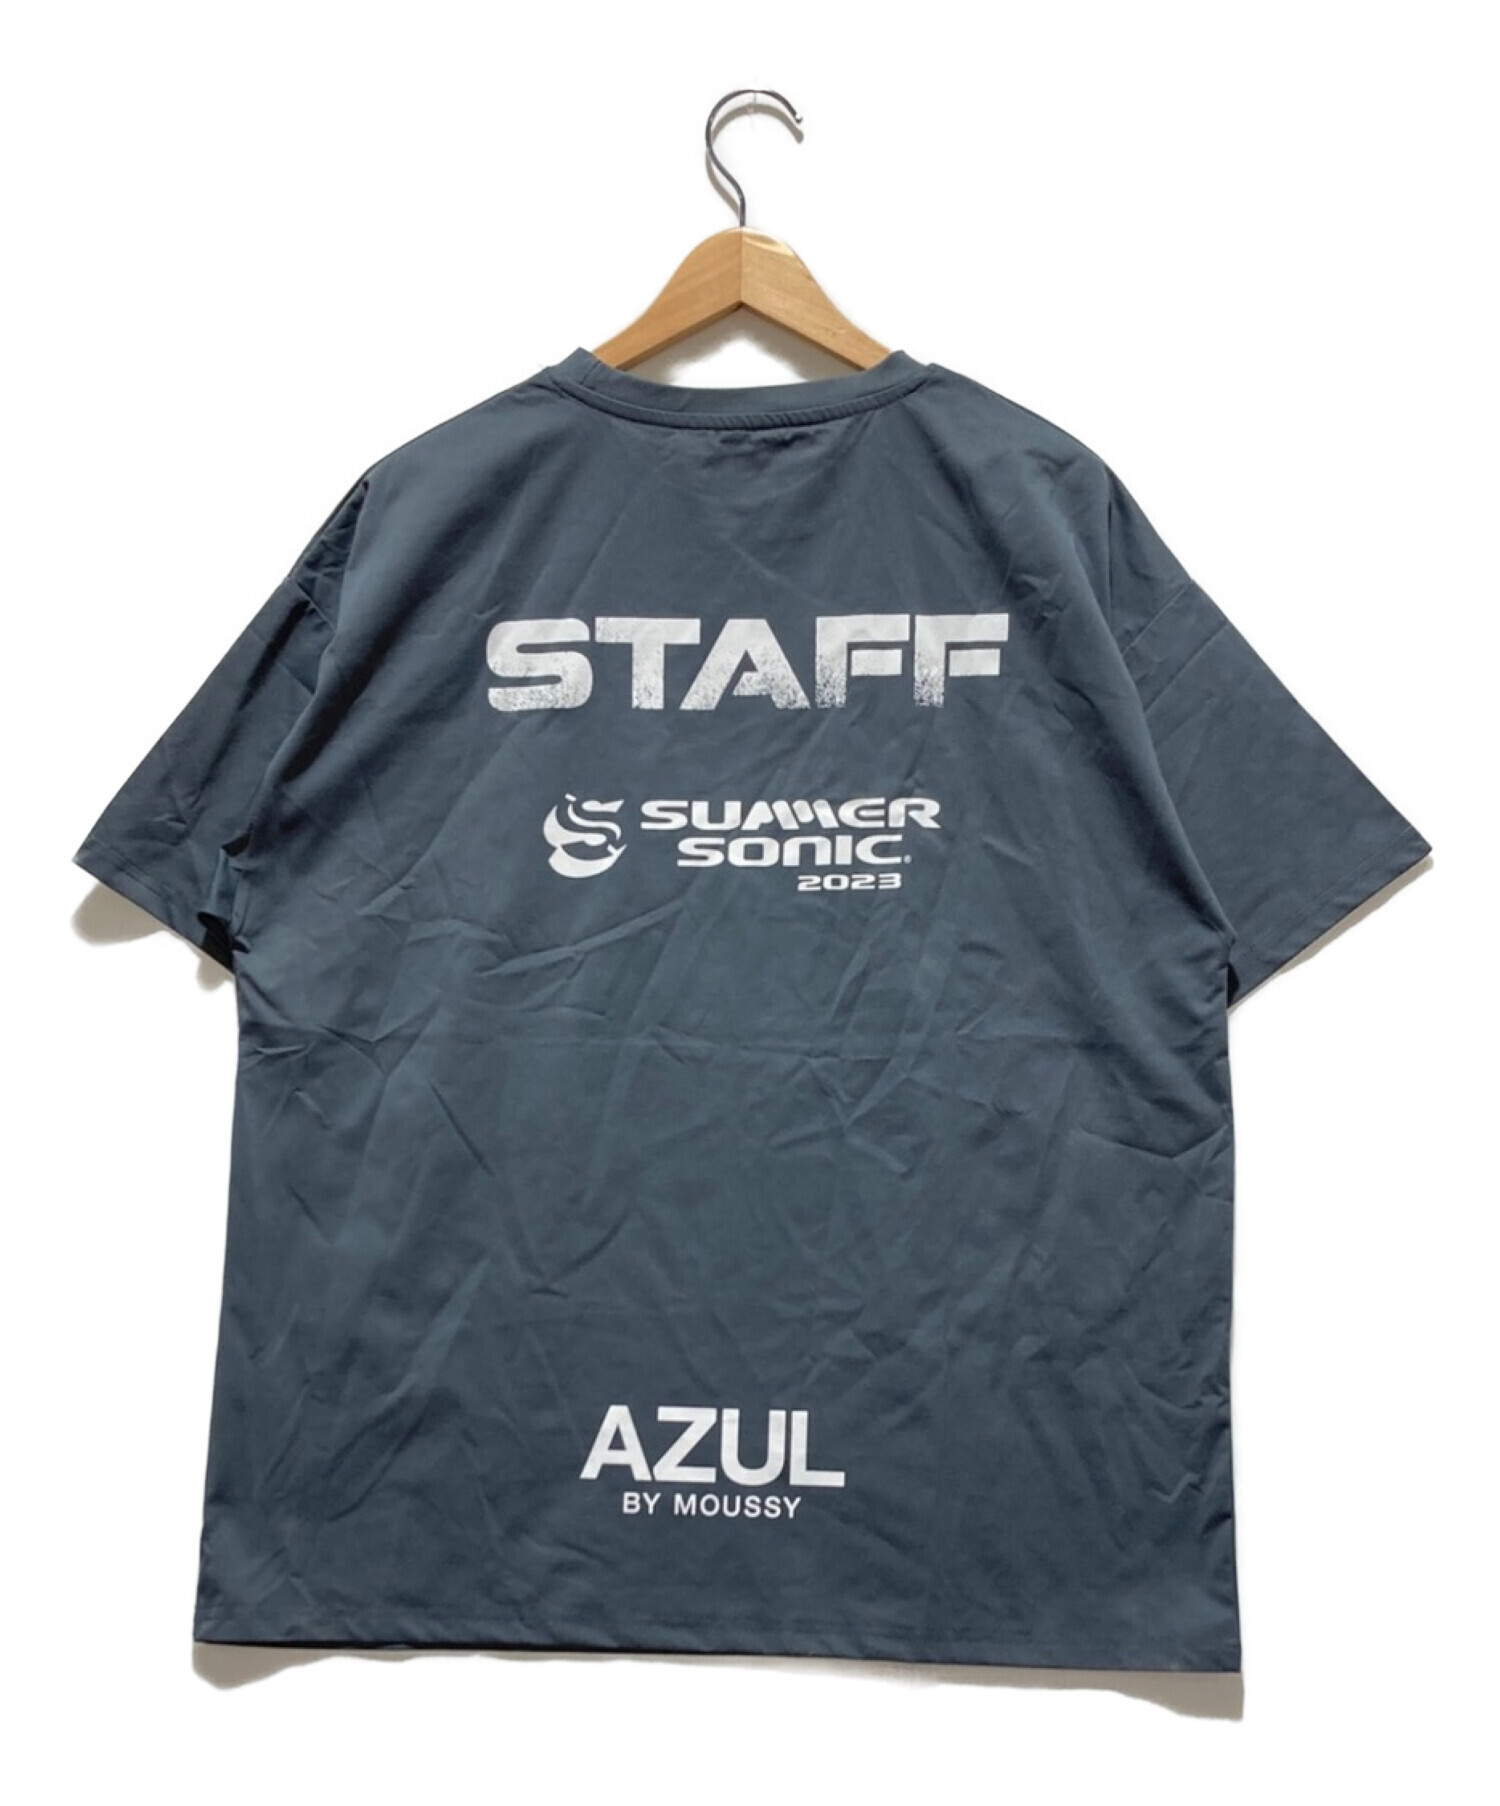 SUMMER SONIC STAFF Tシャツ AZUL by moussy - Tシャツ